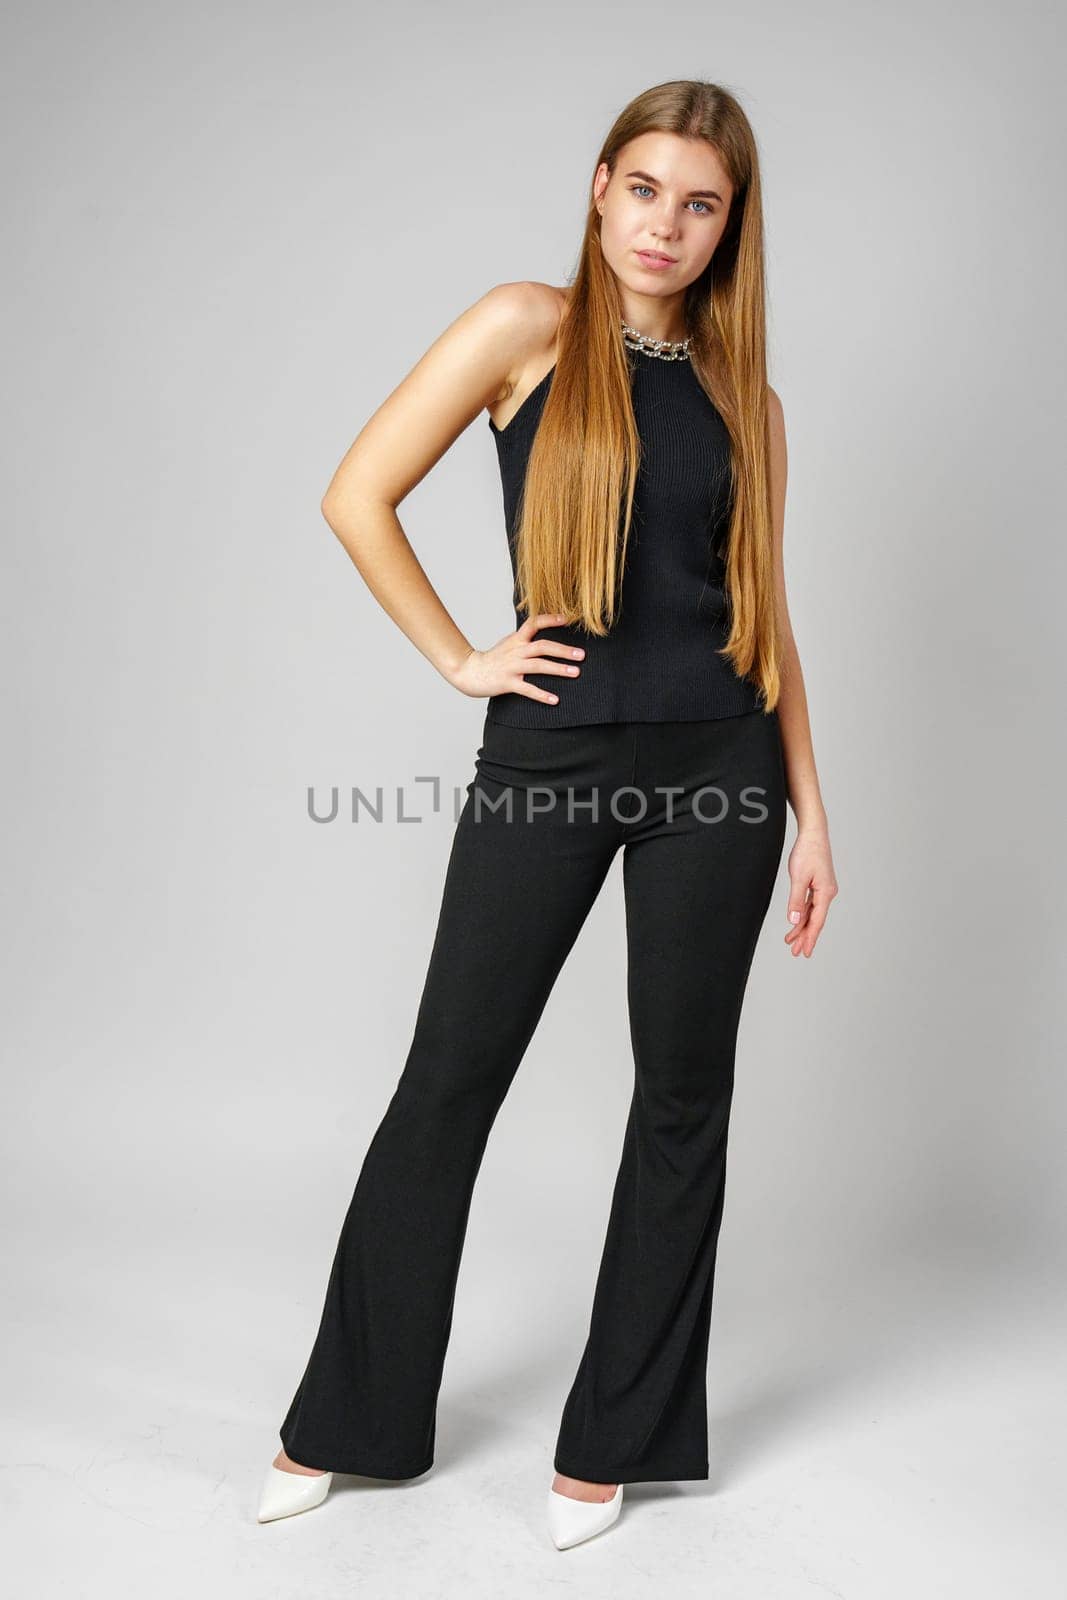 Woman With Long Hair in Black Pants and Top by Fabrikasimf